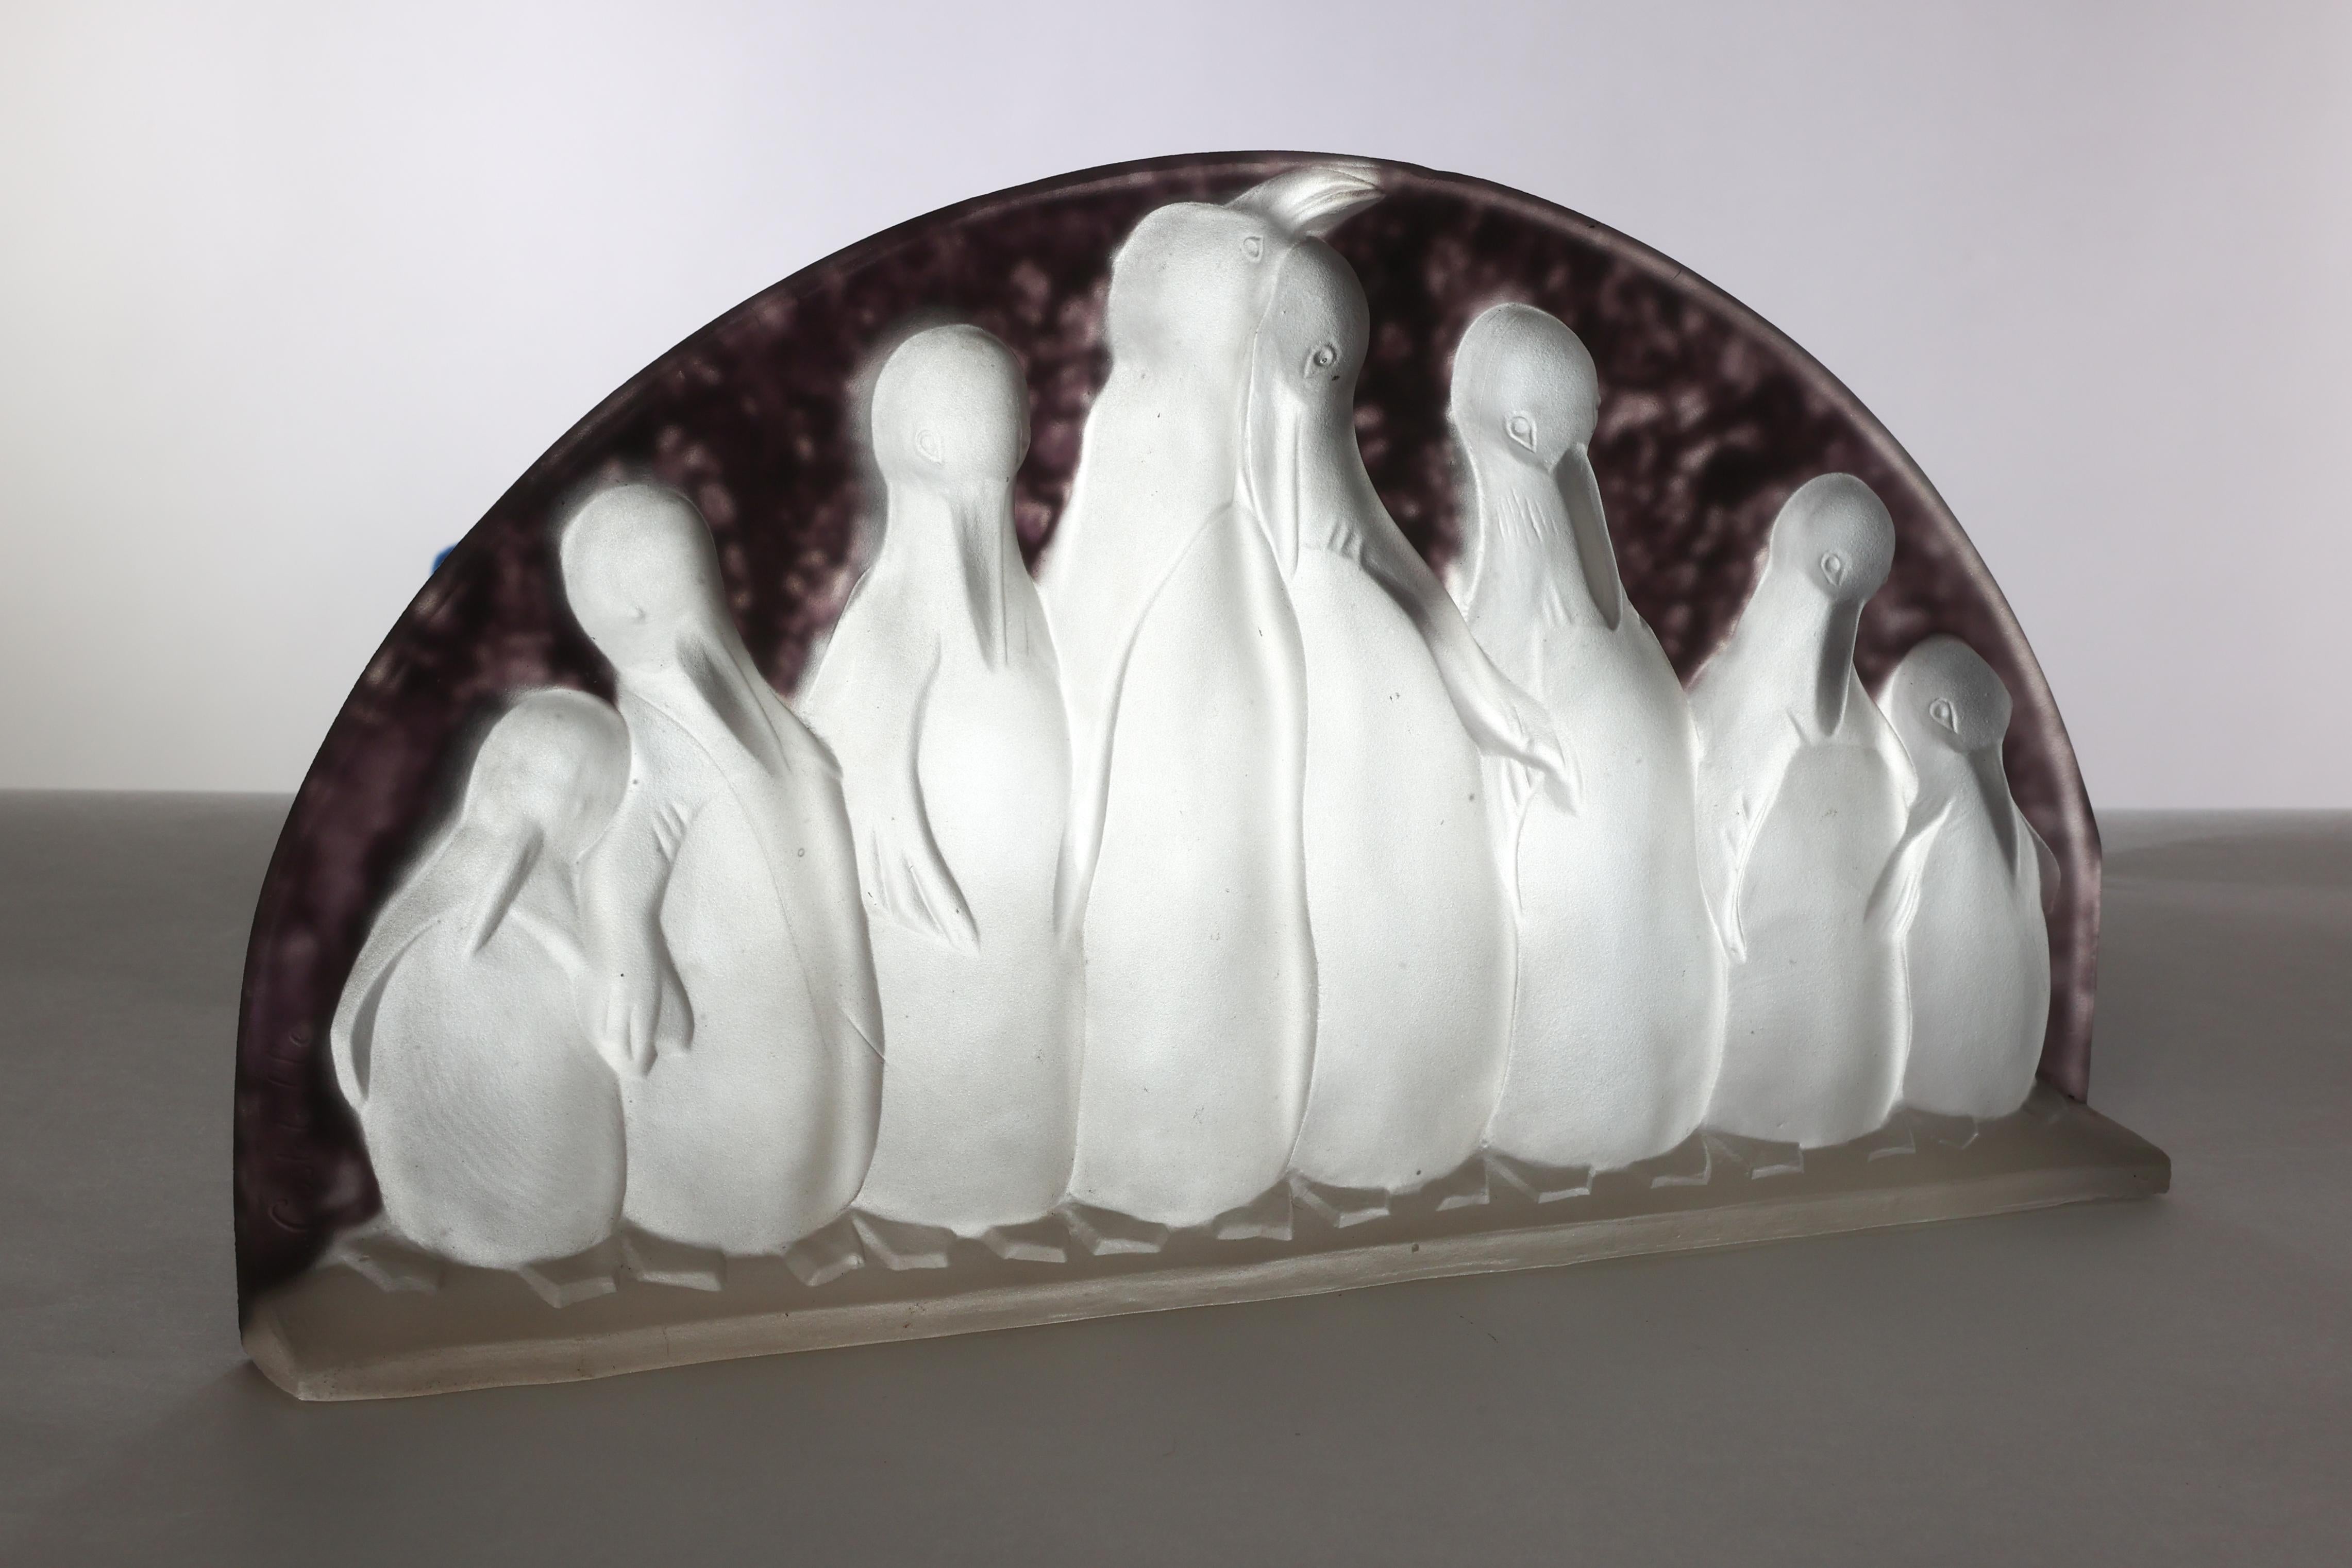 Verreries de Costebelle.

An Art Deco half-moon frosted opalescent glasswork depicting a colony of penguins.

Signed Costebelle on the left side of the glass